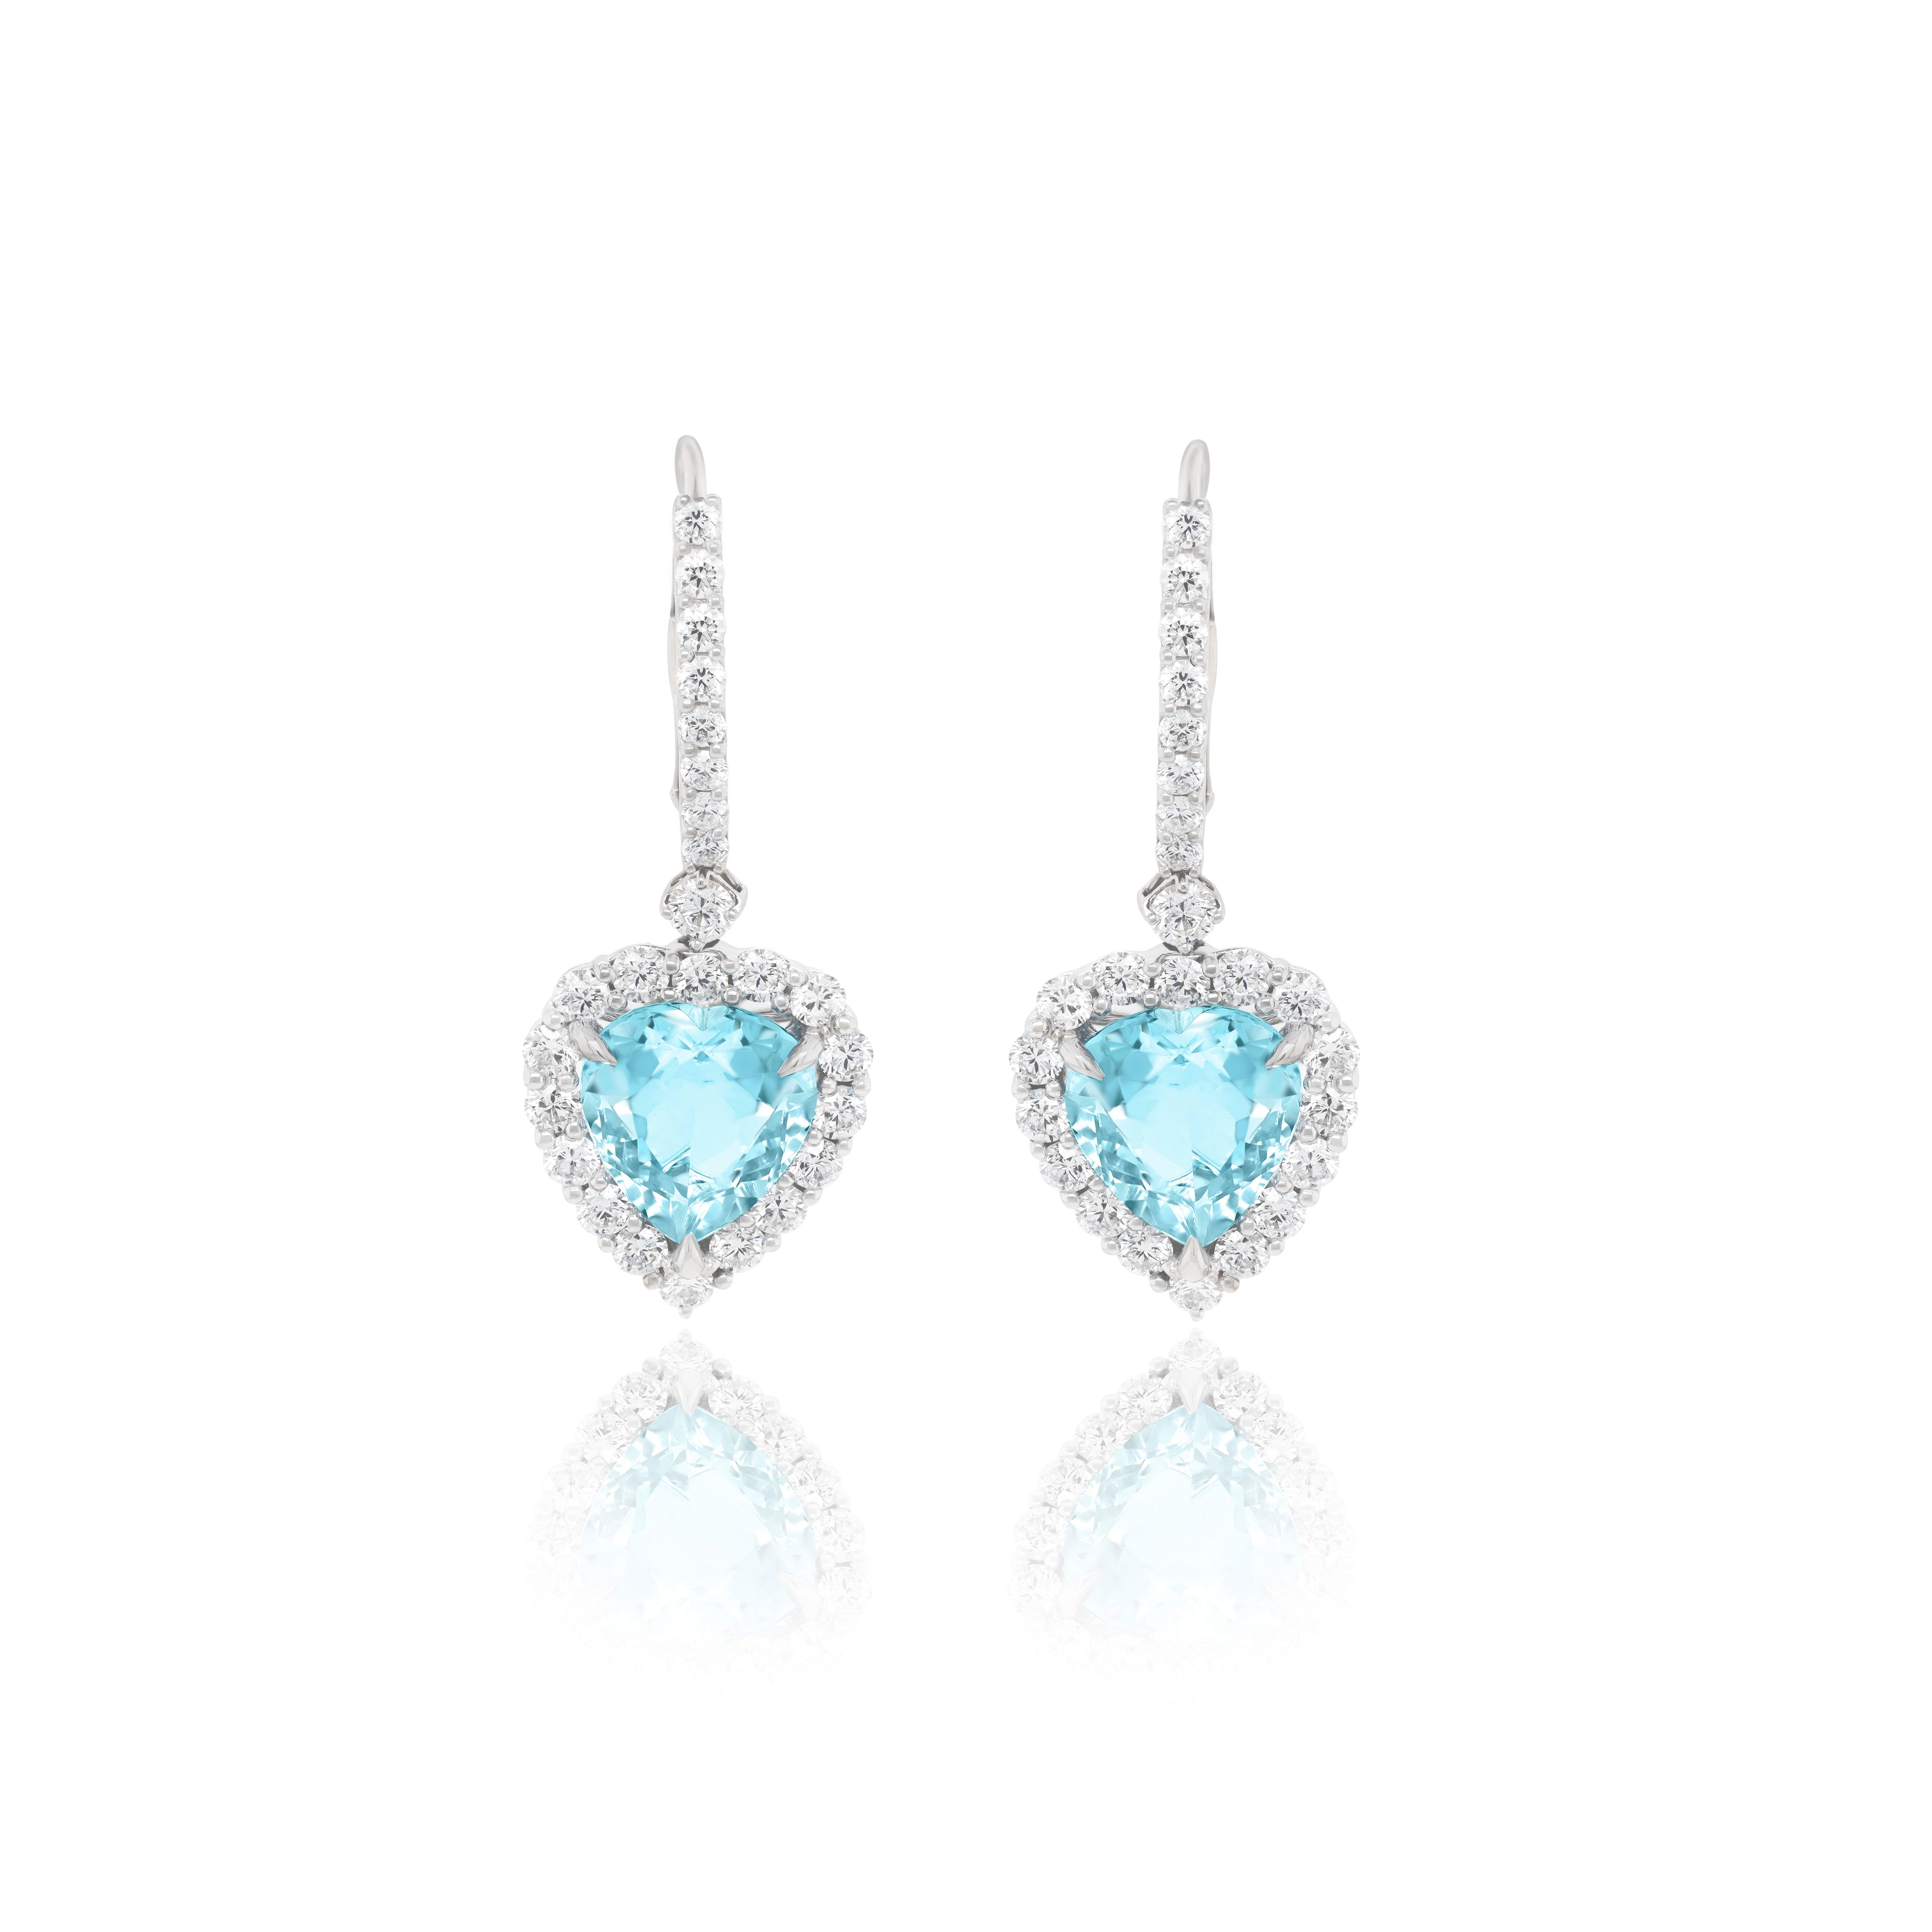 18kt white gold fashion earring 2pcs aquamarine heart center stone 7.70 cts with 2pcs marquise 0.18cts and 48 stone 2.42 cts diamonds around.